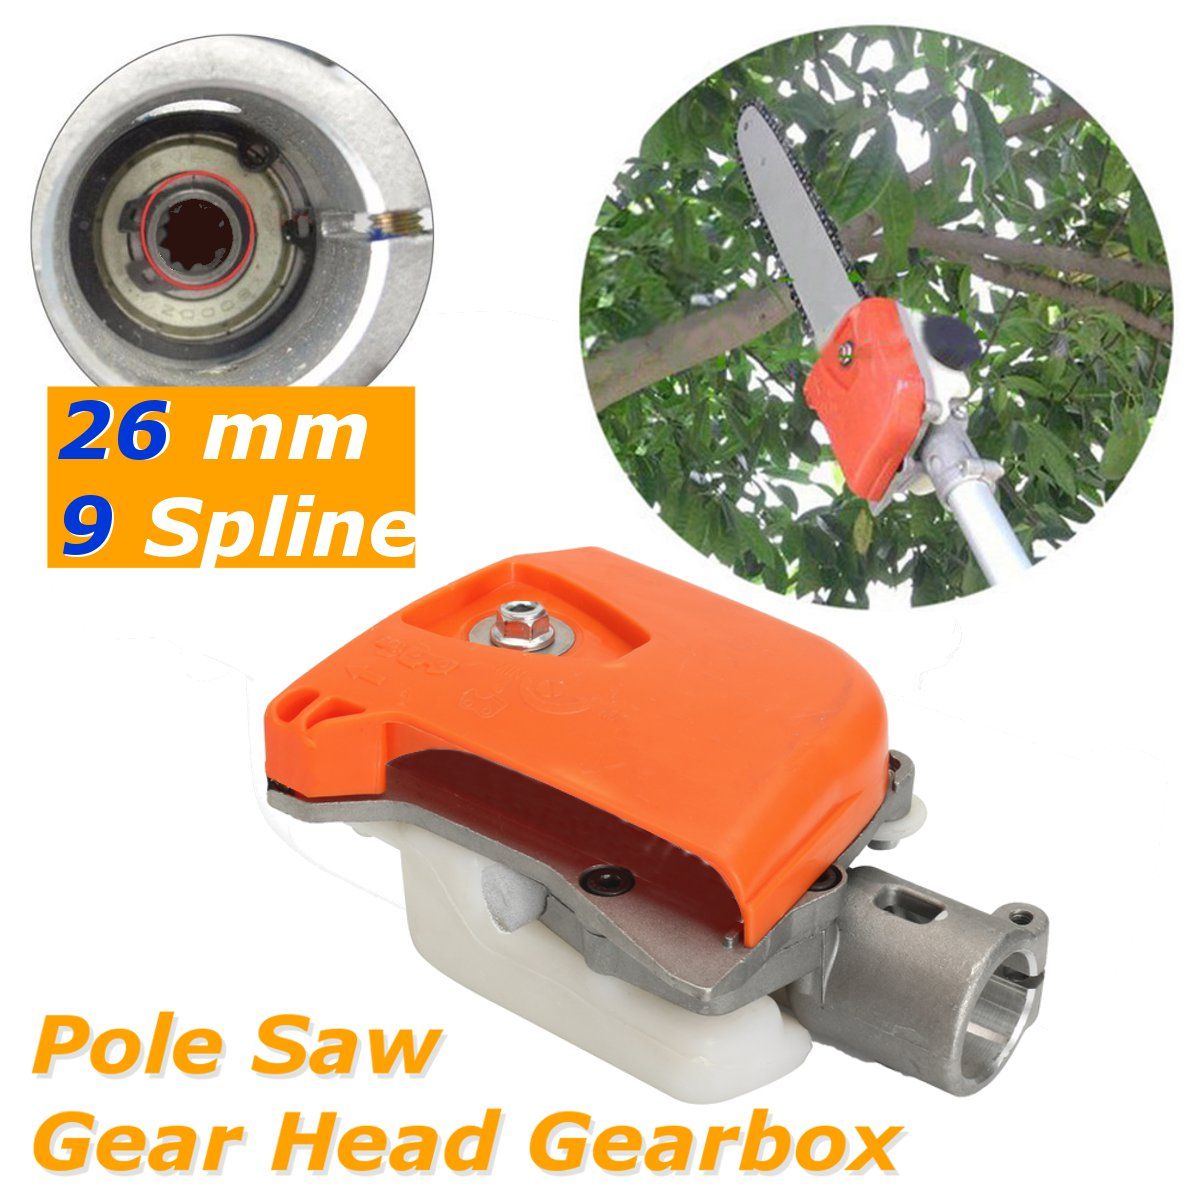 26mm-9-Gears-Pole-Saw-Chainsaw-Gear-Head-Gearbox-for-Stihl-Trimmer-1233430